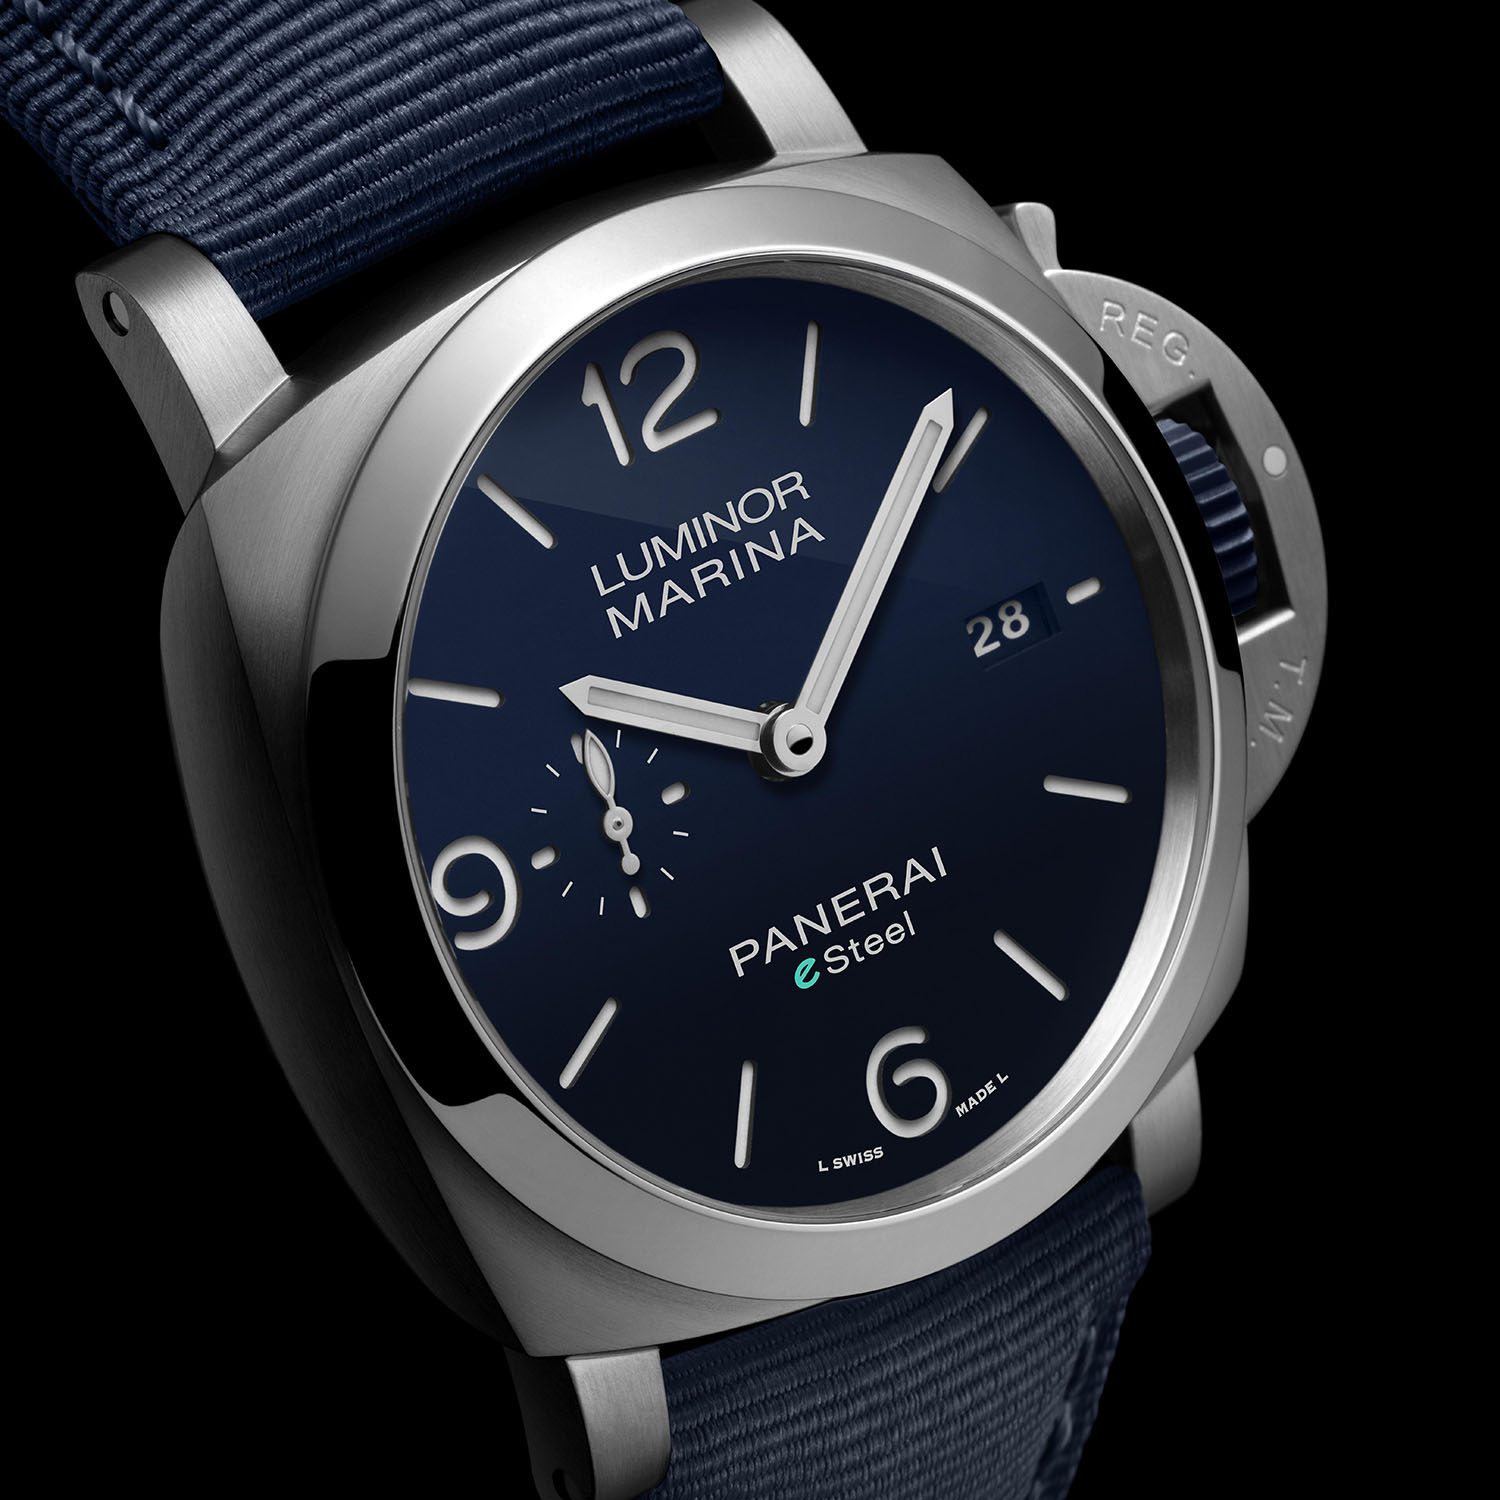 Instead, let's focus on these three new allusions. The PAM01157, PAM01356 and PAM01358 are very traditional Luminor Marinas, matching much of the design cues and characteristics with conventional stainless steel models like the PAM01313, save from this unheard-of alloy. This entails a traditional cushion-shaped casing with dimensions of 44mm in diameter and 15.45mm in height, which is mostly brushed with a polished bezel, the recognizable Safety Lock crown protection system (also made of eSteel), and 300m water resistant. The crown is also rubberized in the same color as the dial.